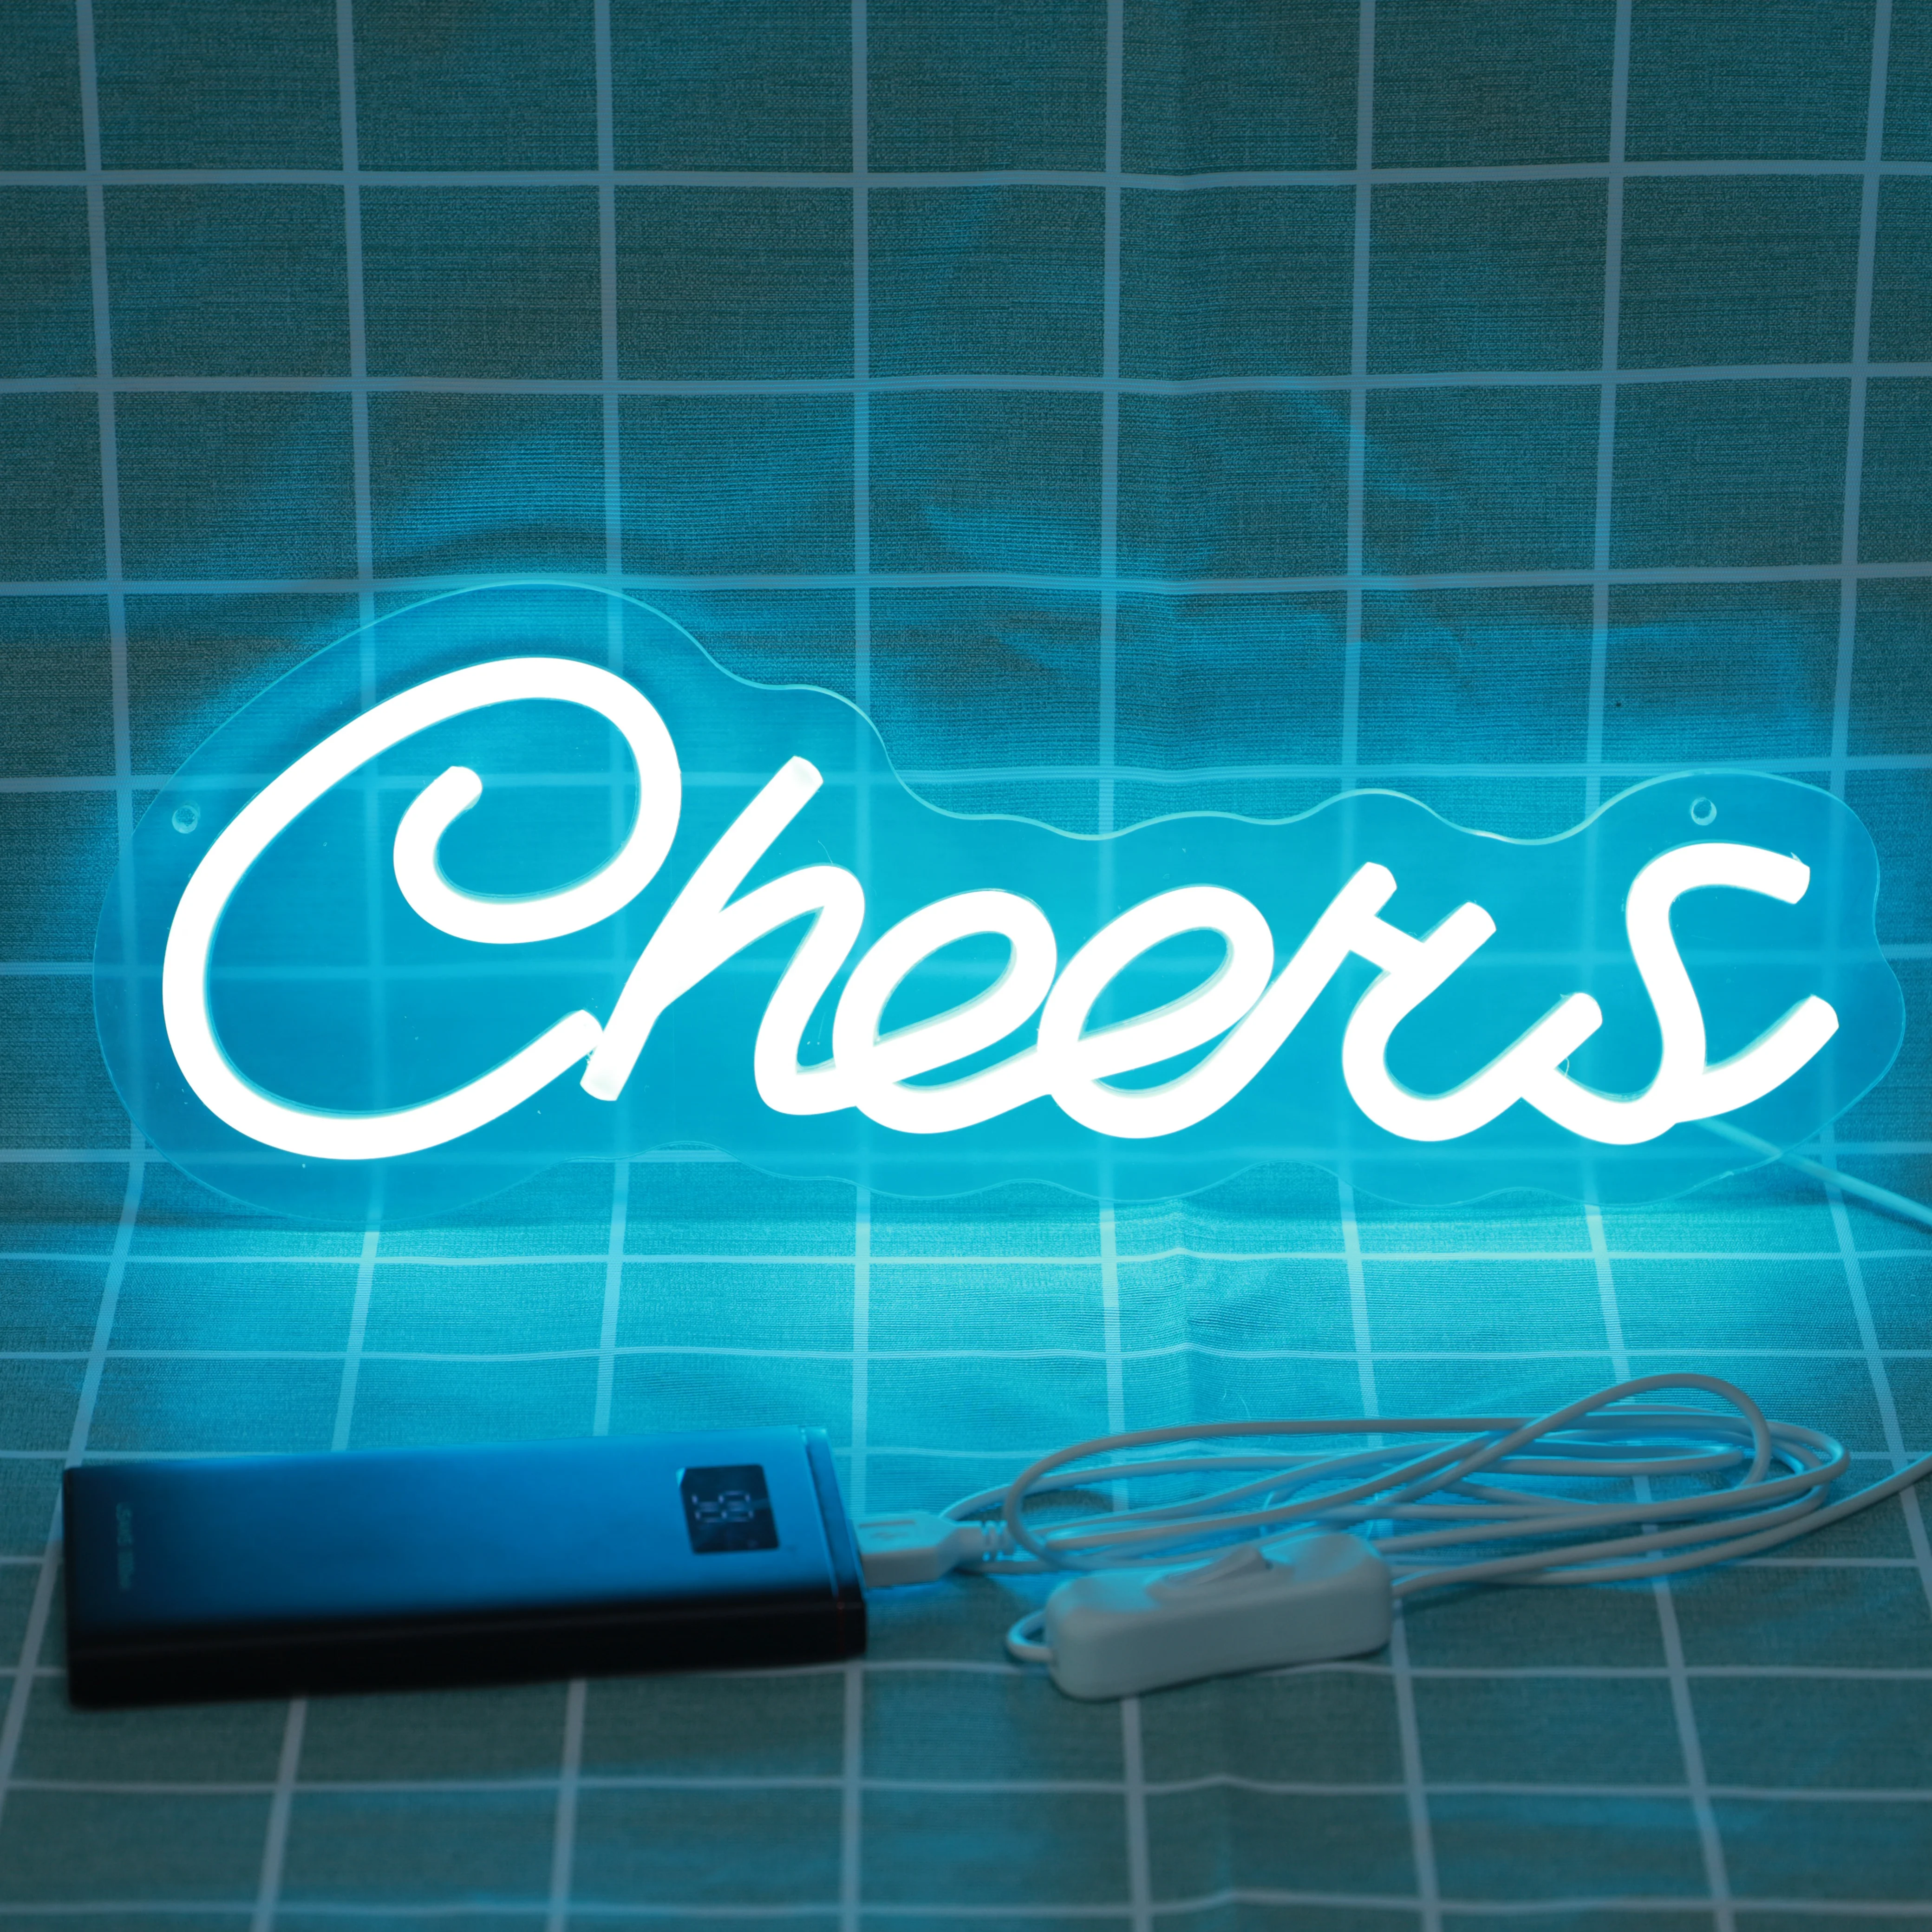 Neon Lights Cheers Design Led Neon Signs Light for Bar Pub Club Home Restaurant Wall Hanging Neon Lights